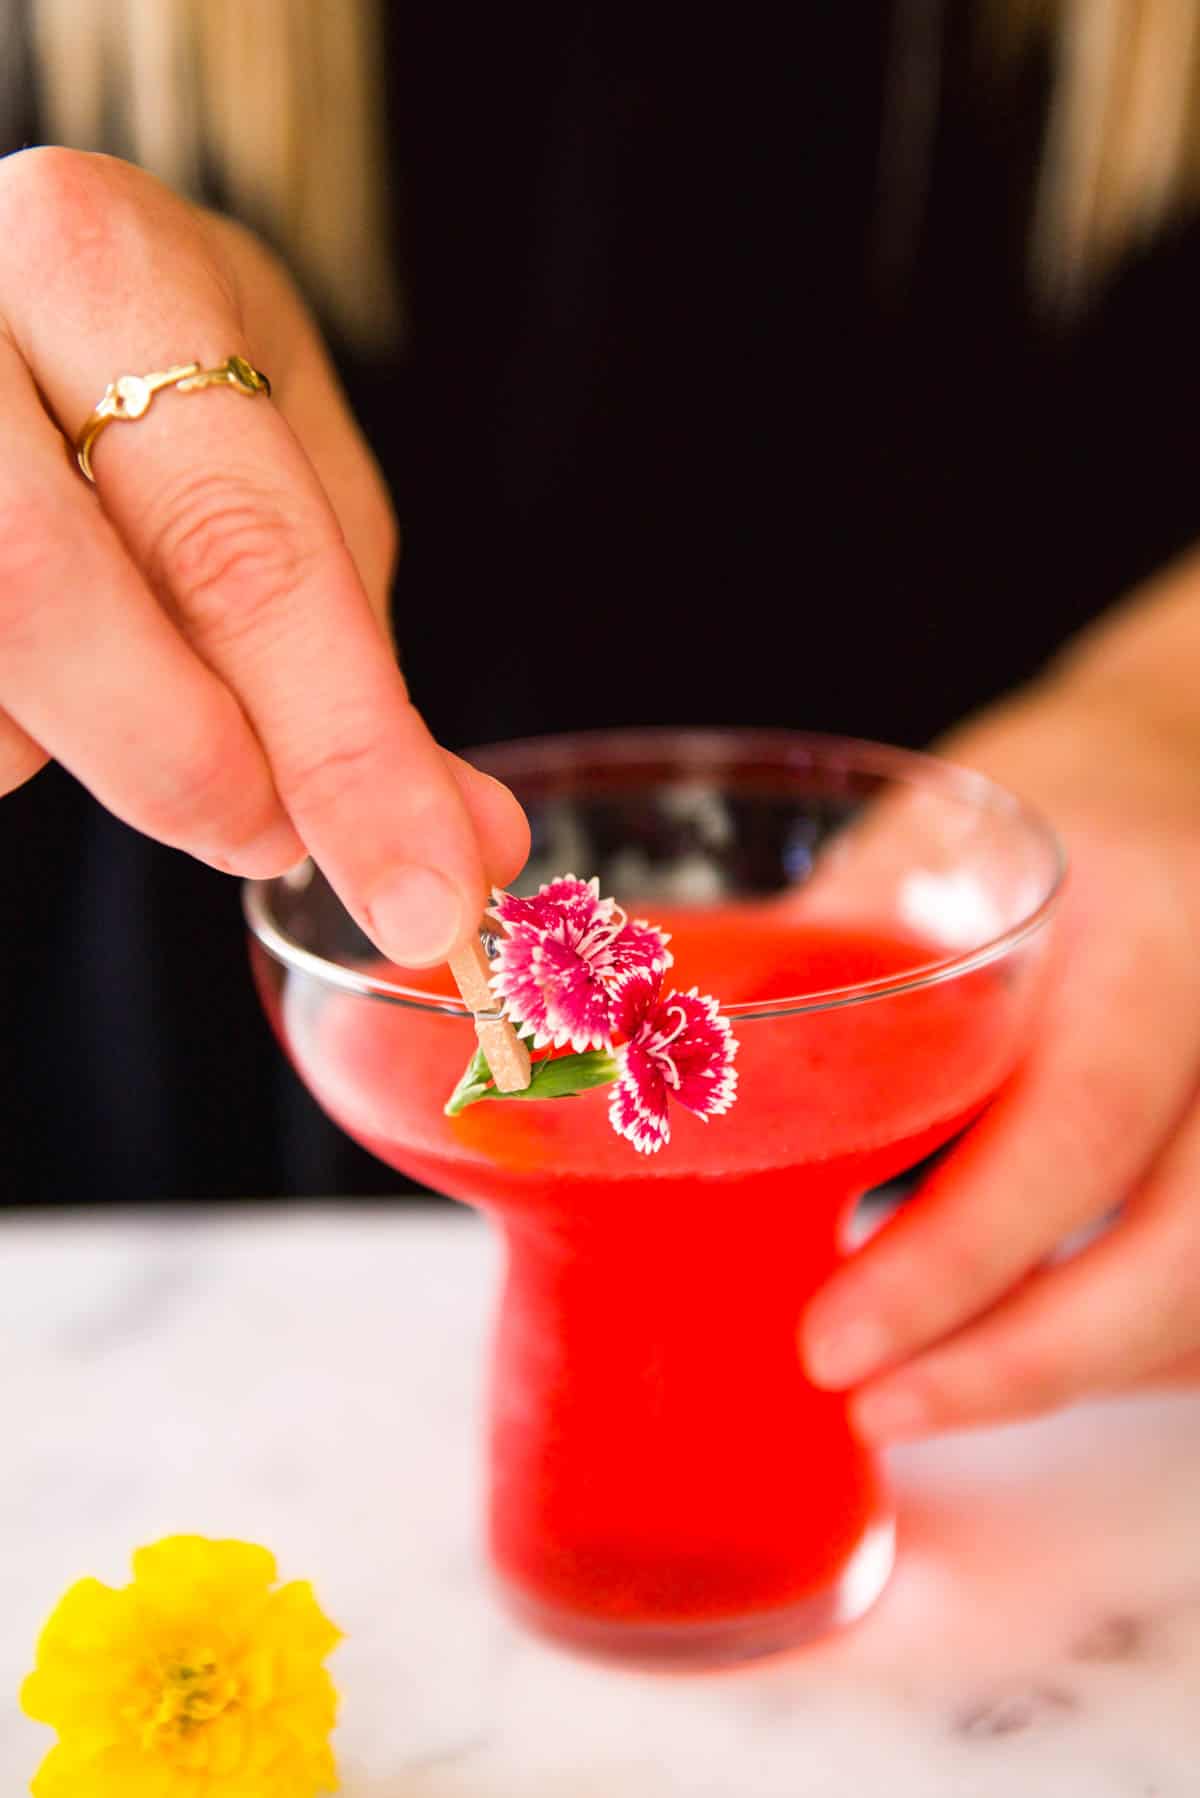 Using a mini clothespin to clip flowers to a cocktail glass.